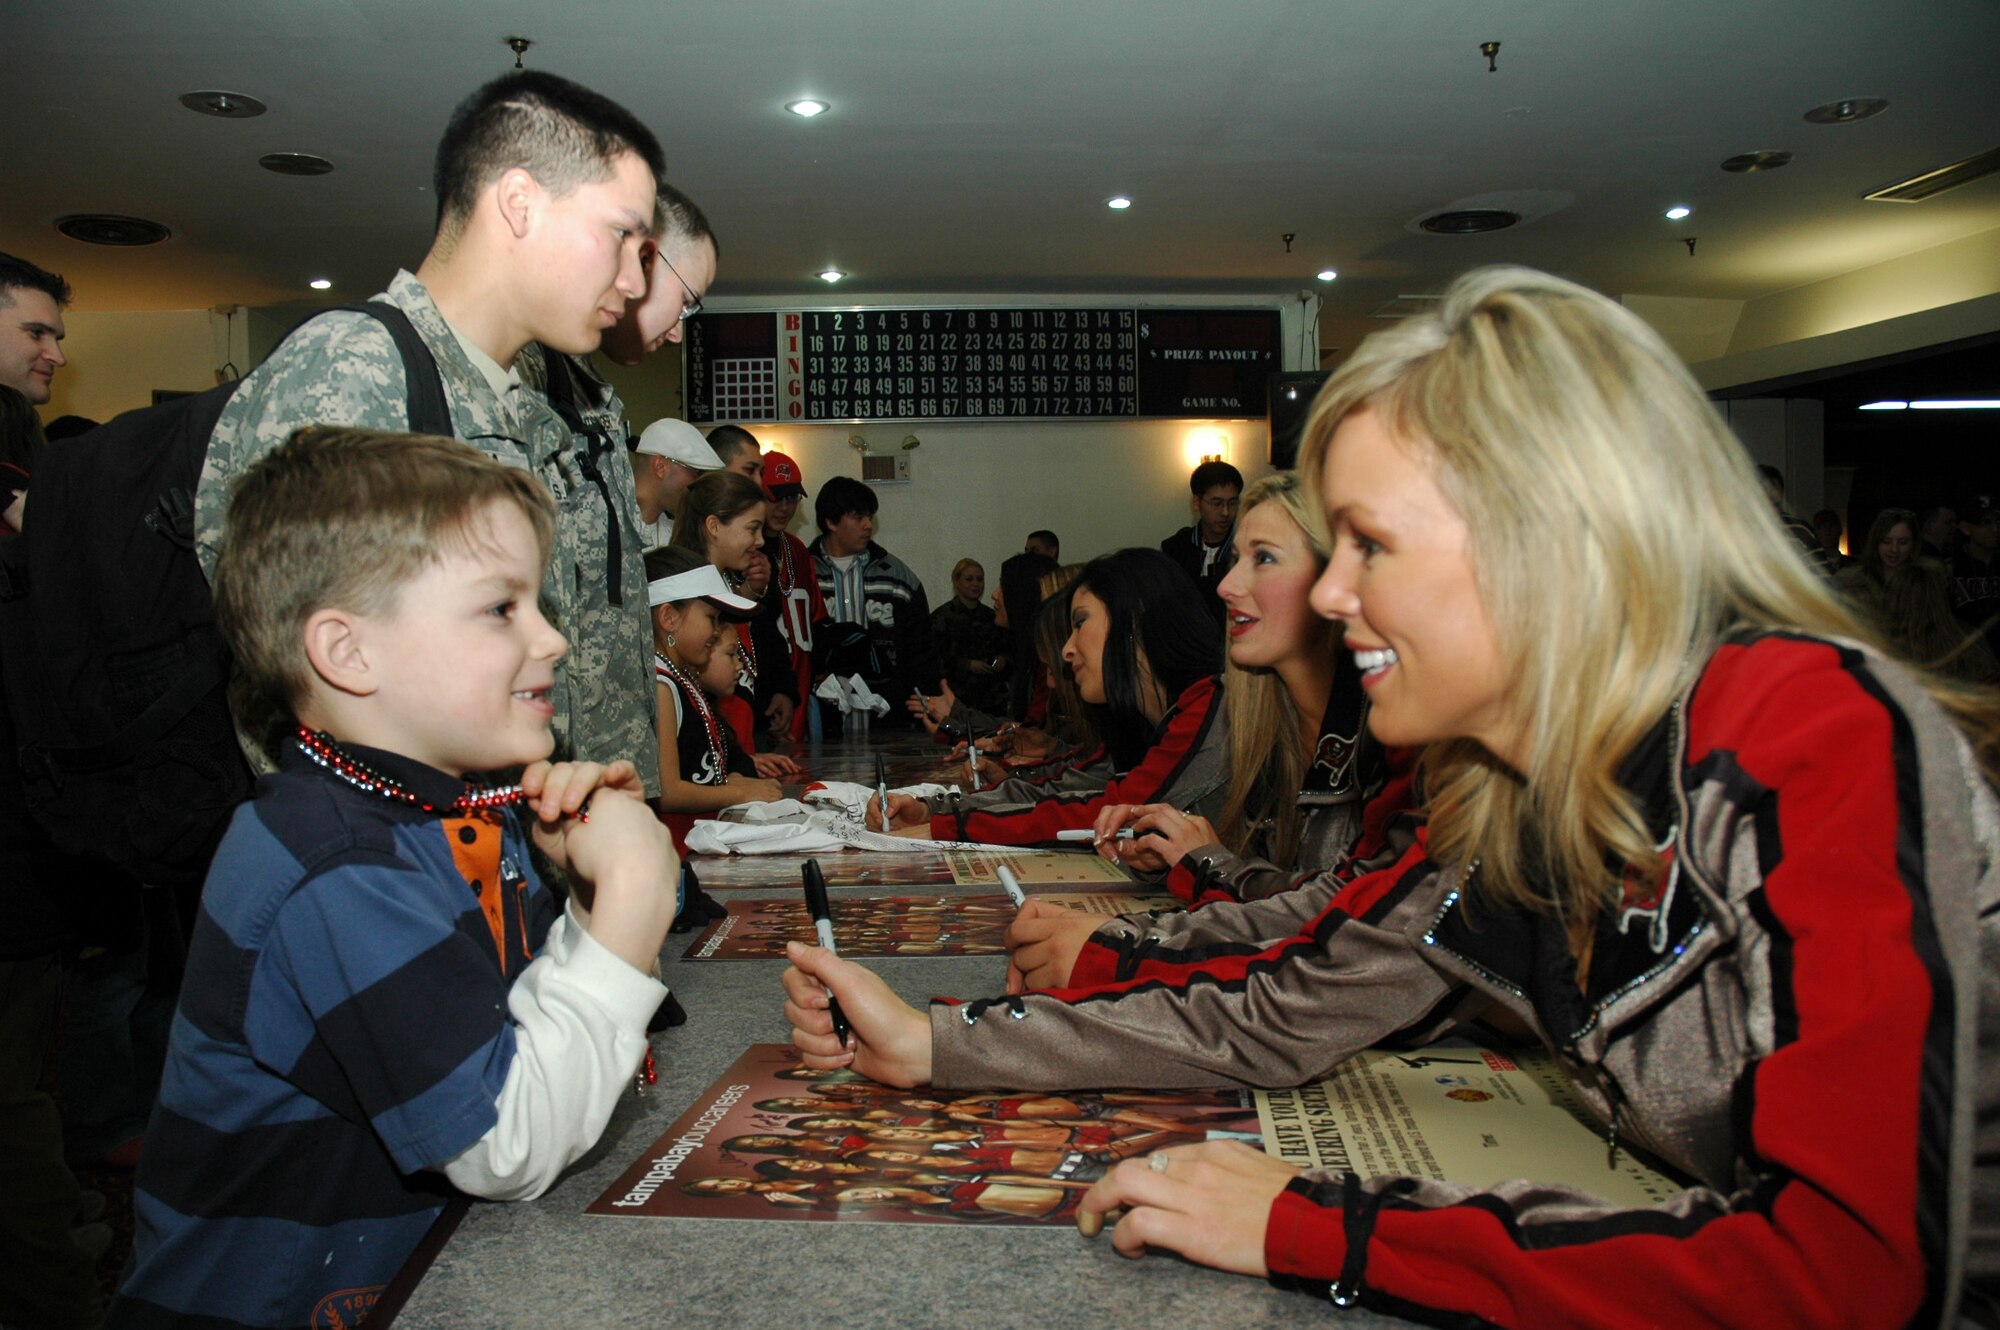 OSAN AIR BASE, Republic of Korea --  Tampa Bay Buccaneers cheerleader Catherine Croake signs an autograph for Trey Hayenga following the cheerleaders’ Appreciation Tour 2007 Feb. 14 at the Challenger Club here. The show consisted of various dance and cheer routines followed by a meet-and-greet autograph session with all the cheerleaders. (U.S. Air Force photo by 1st Lt. Kevin Coffman)